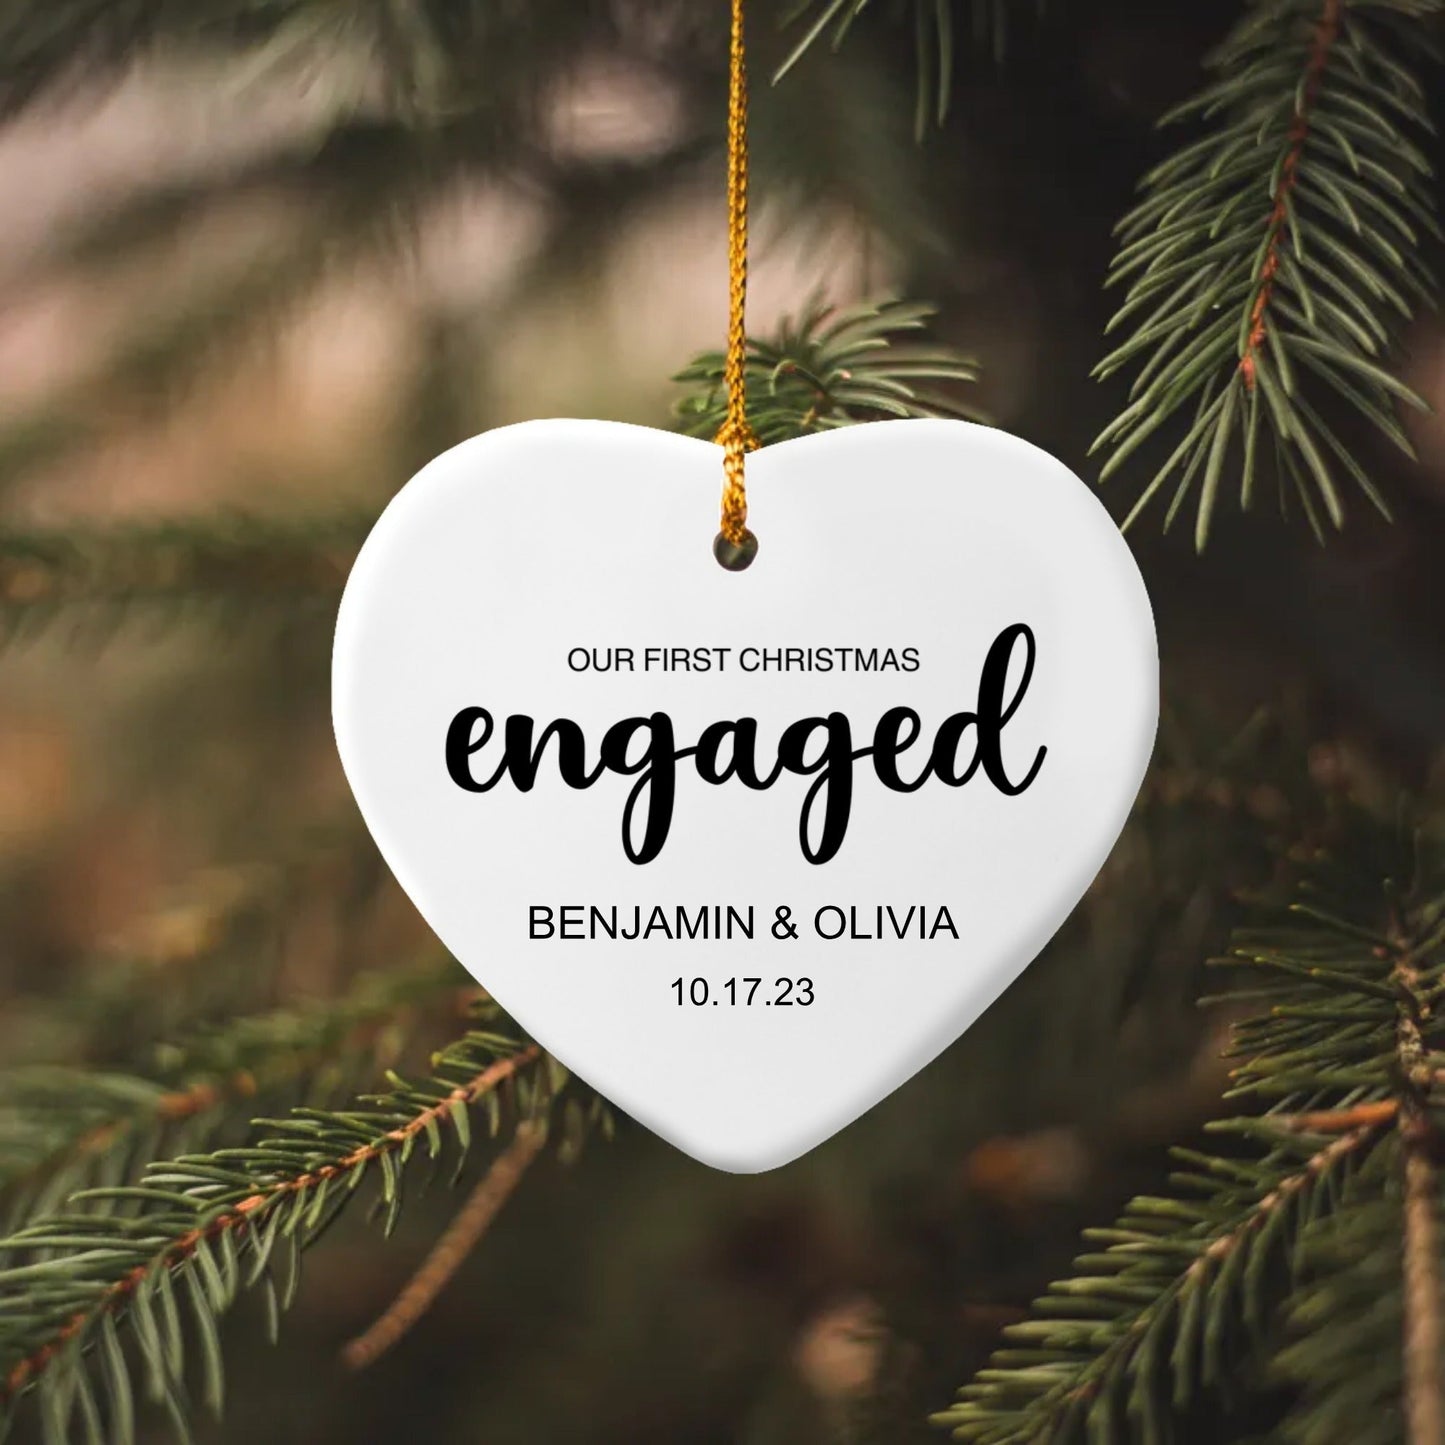 Our First Christmas Engaged Ornament - Personalized Our First Christmas